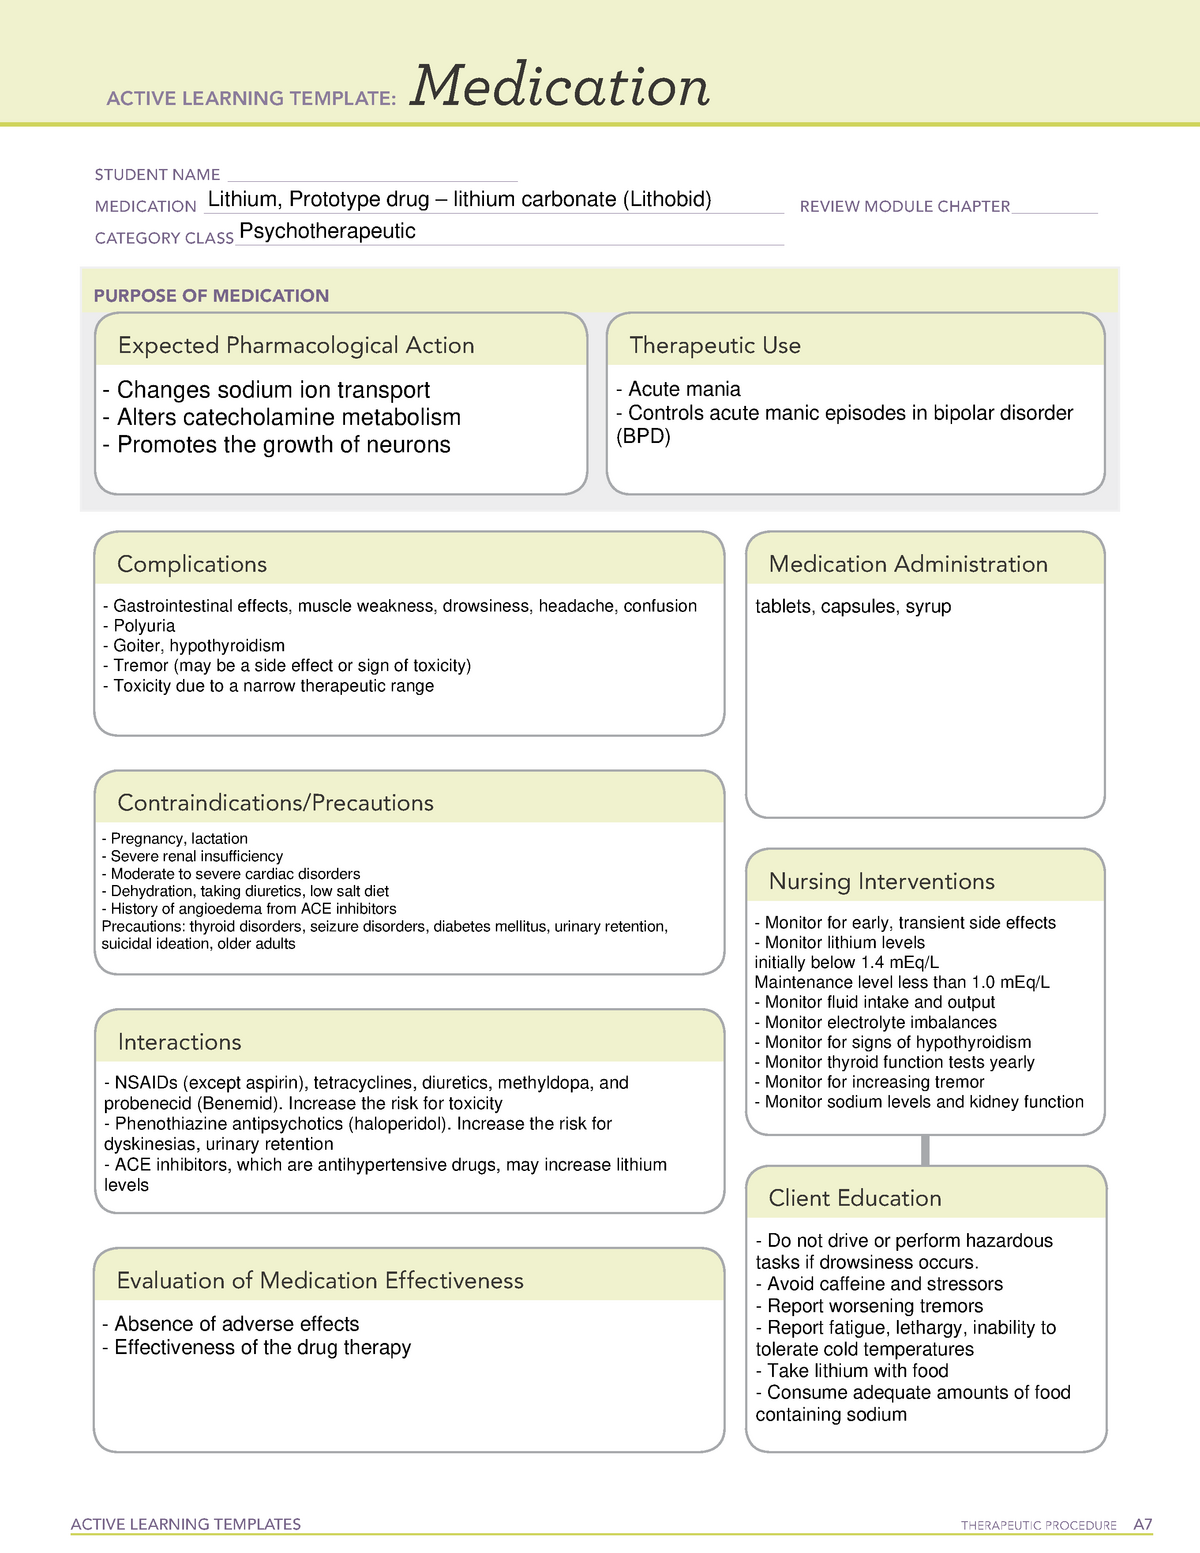 Lithium Medication template ACTIVE LEARNING TEMPLATES THERAPEUTIC